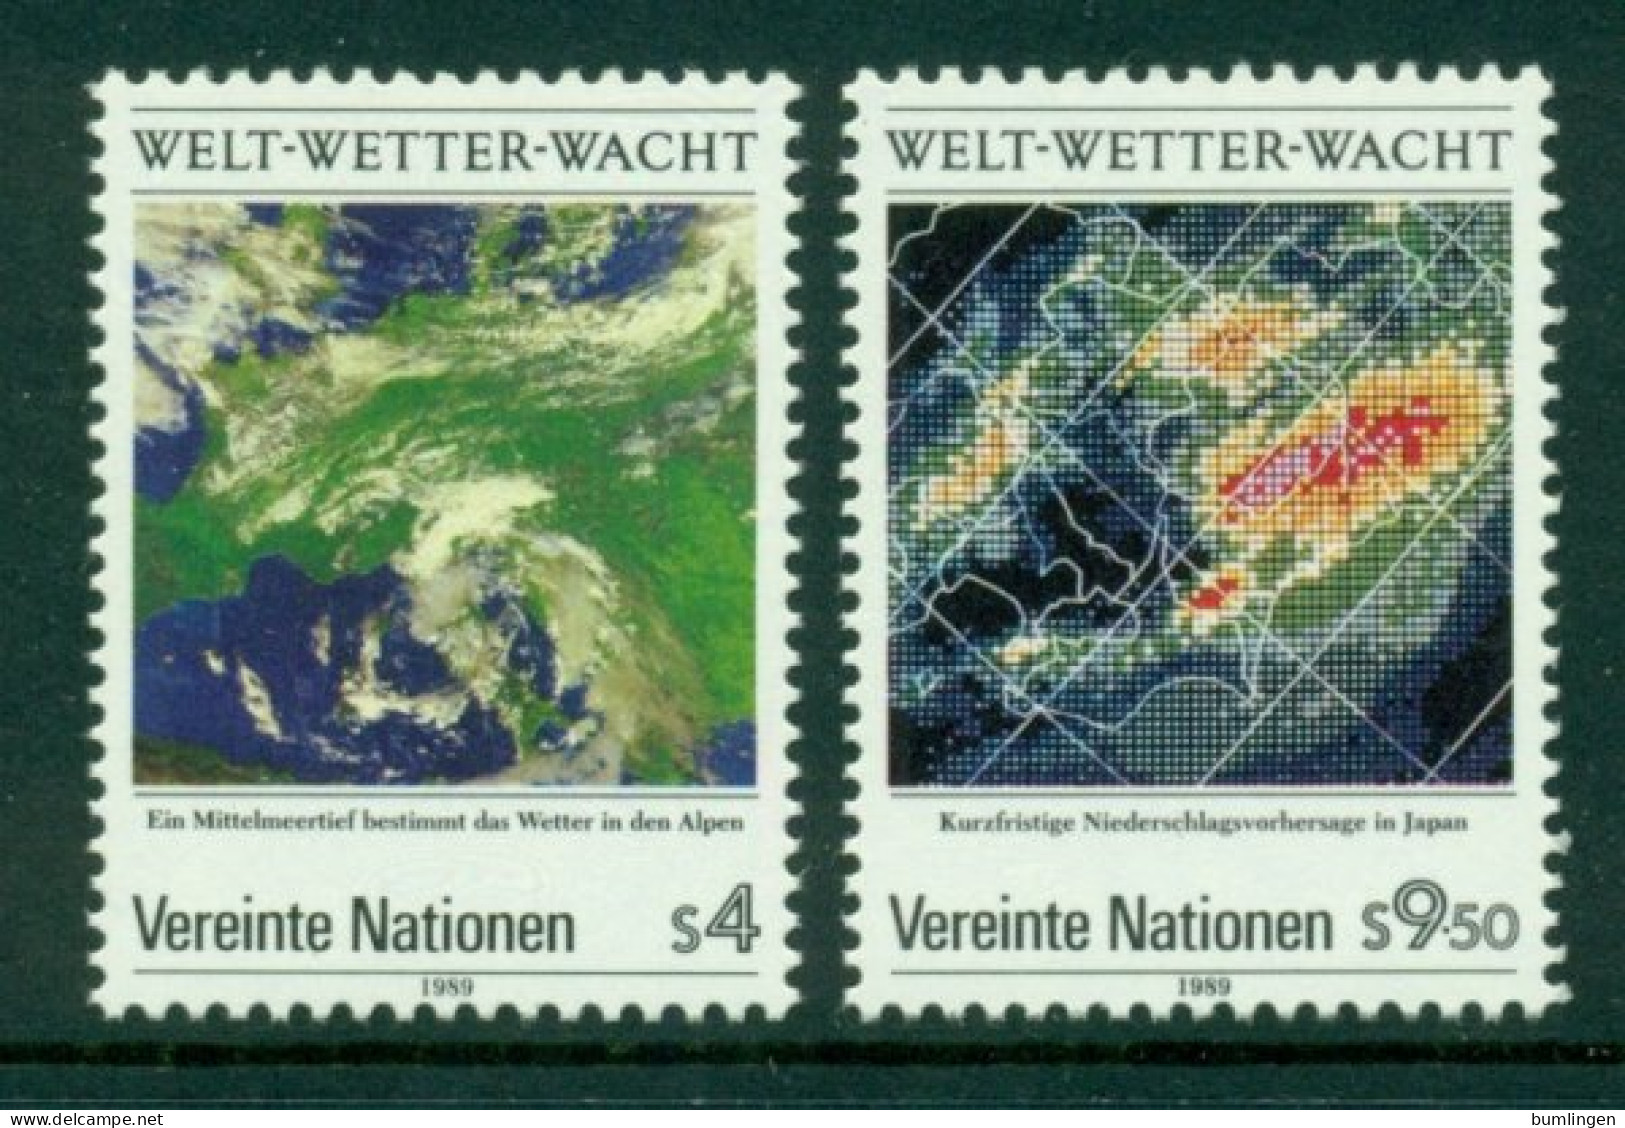 UNITED NATIONS (Wien) 1989 Mi 92-93** 25th Anniversary Of World Weather Watch [L3158] - Climate & Meteorology